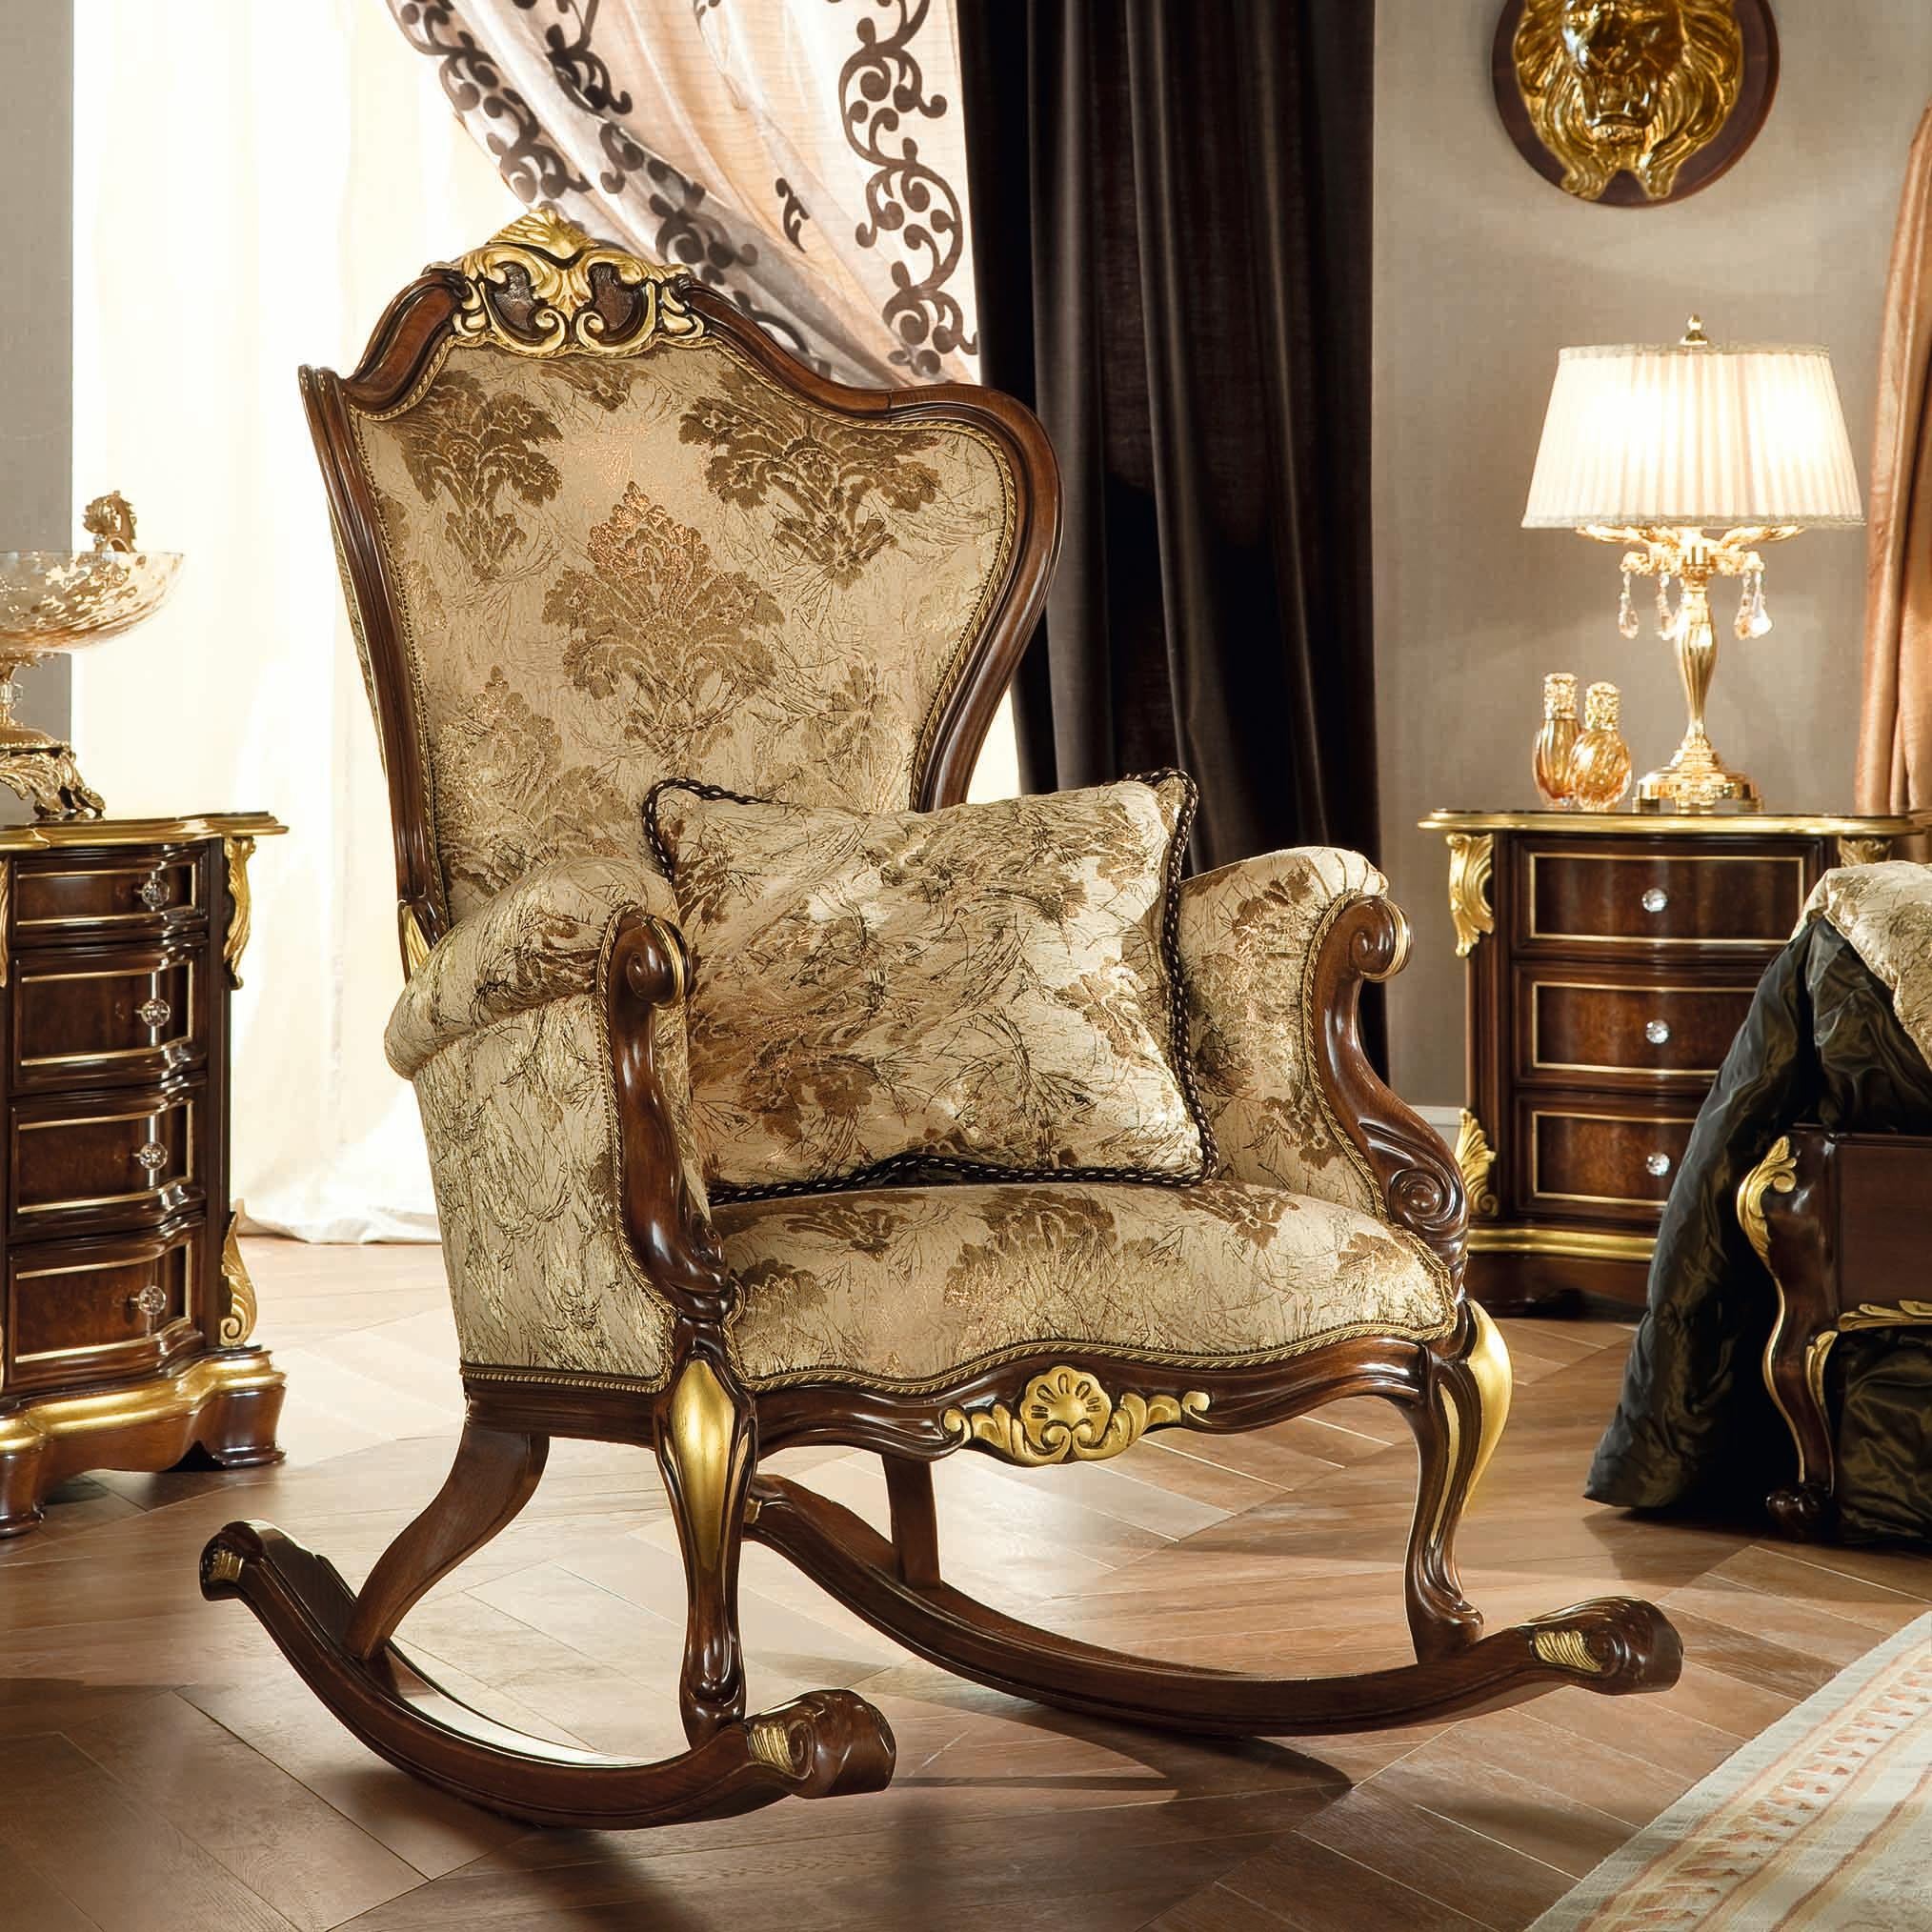 Classy baroque rocking armchair in natural walnut wood and patinated gold leaf finishes. Upholstered with a premium damascus ivory fabric and tested by our specialized employees. Every detail is hand carved by our artisans according to the ancient